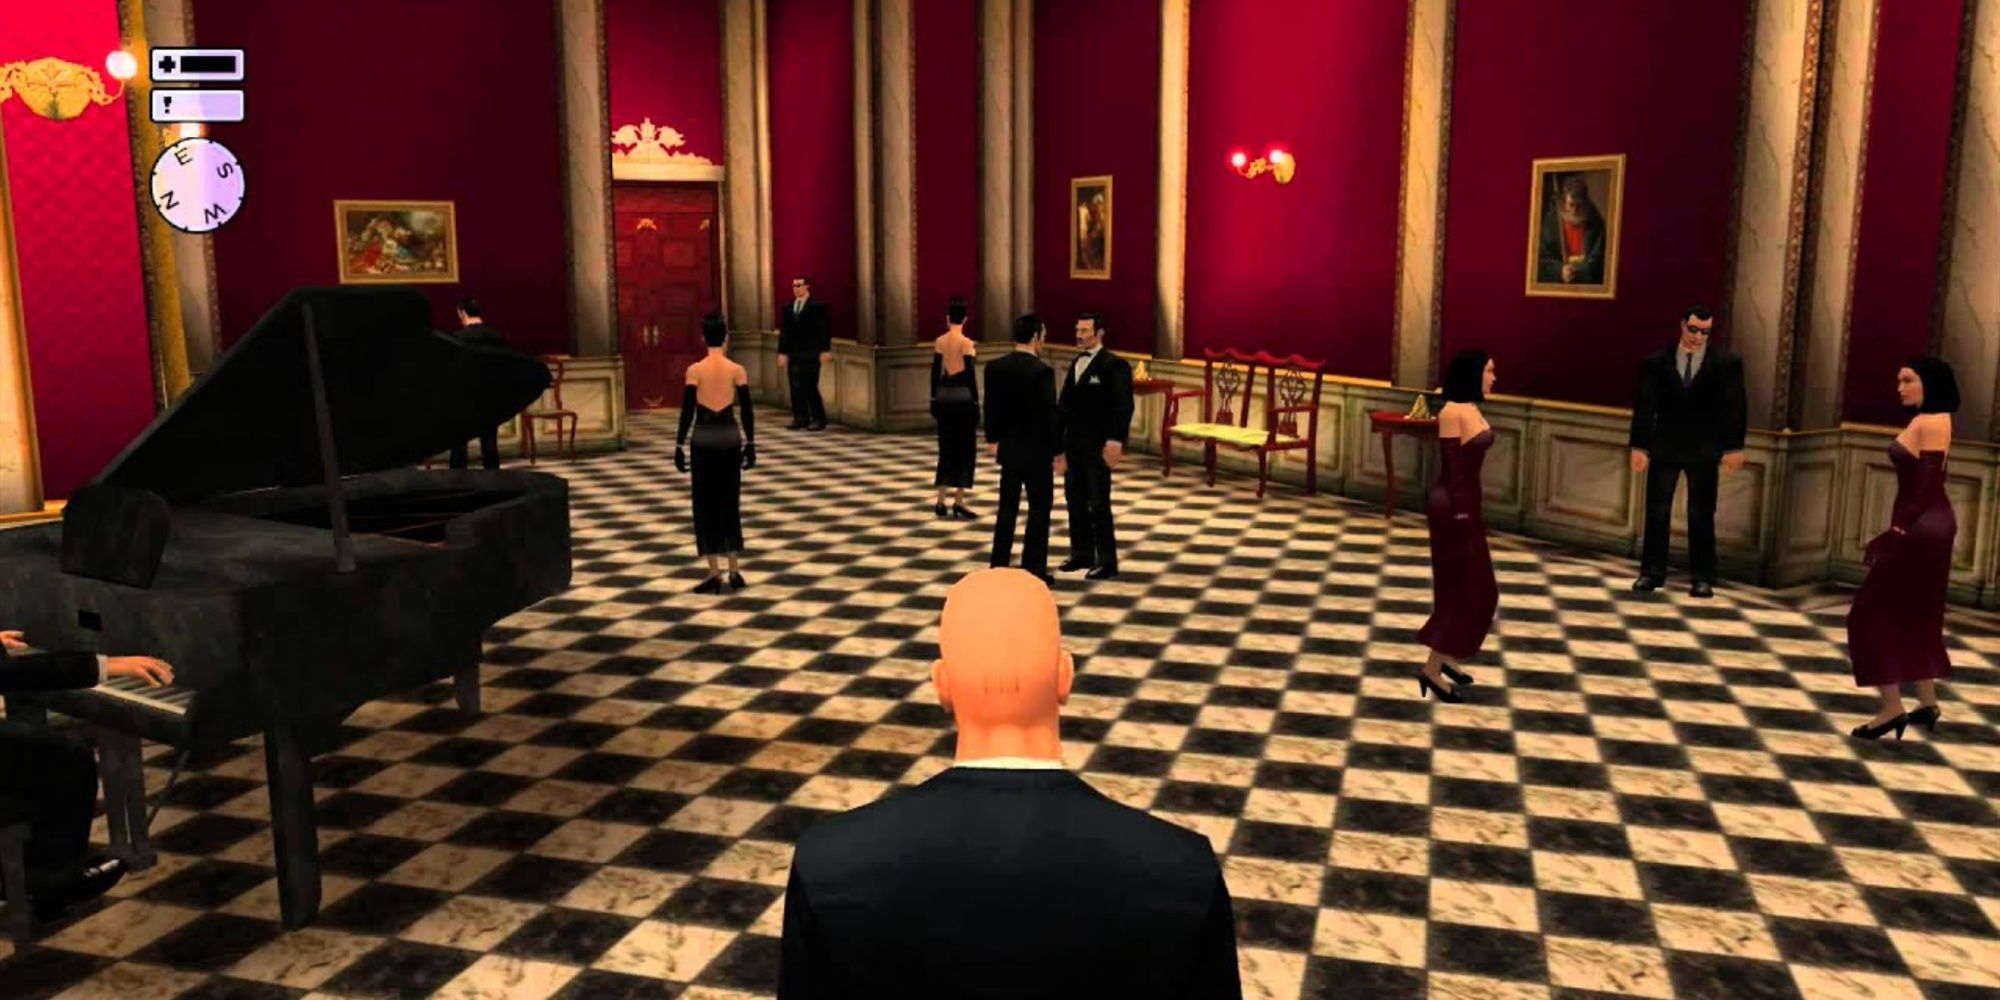 Attending a party in Hitman 2 Silent Assassin